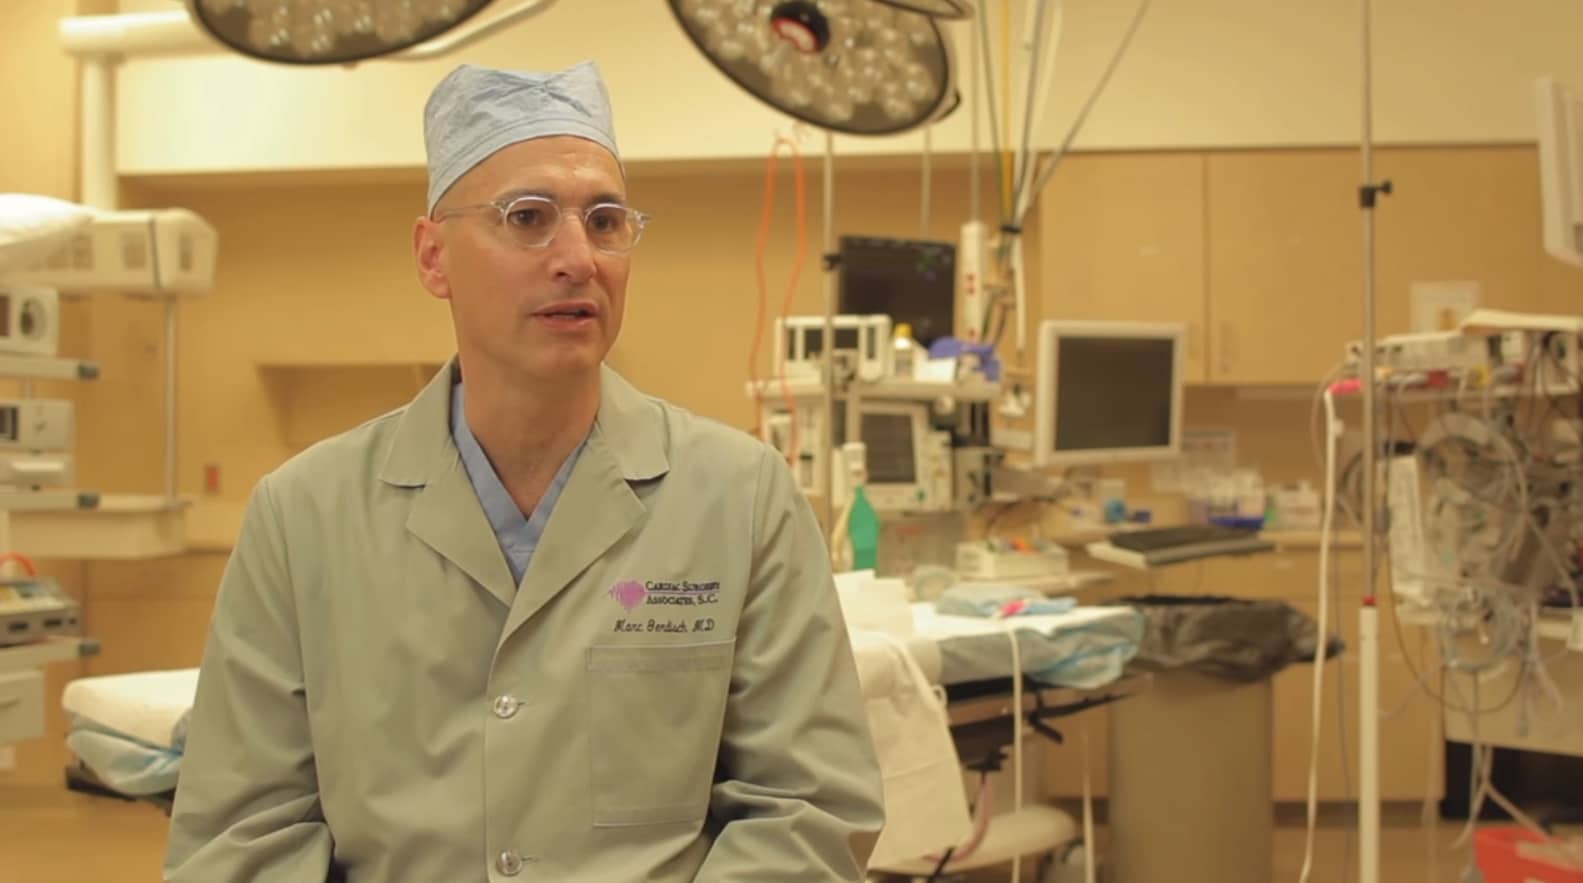 Screengrab of Dr. Marc Gerdisch from "Living with Valve Disease" video.